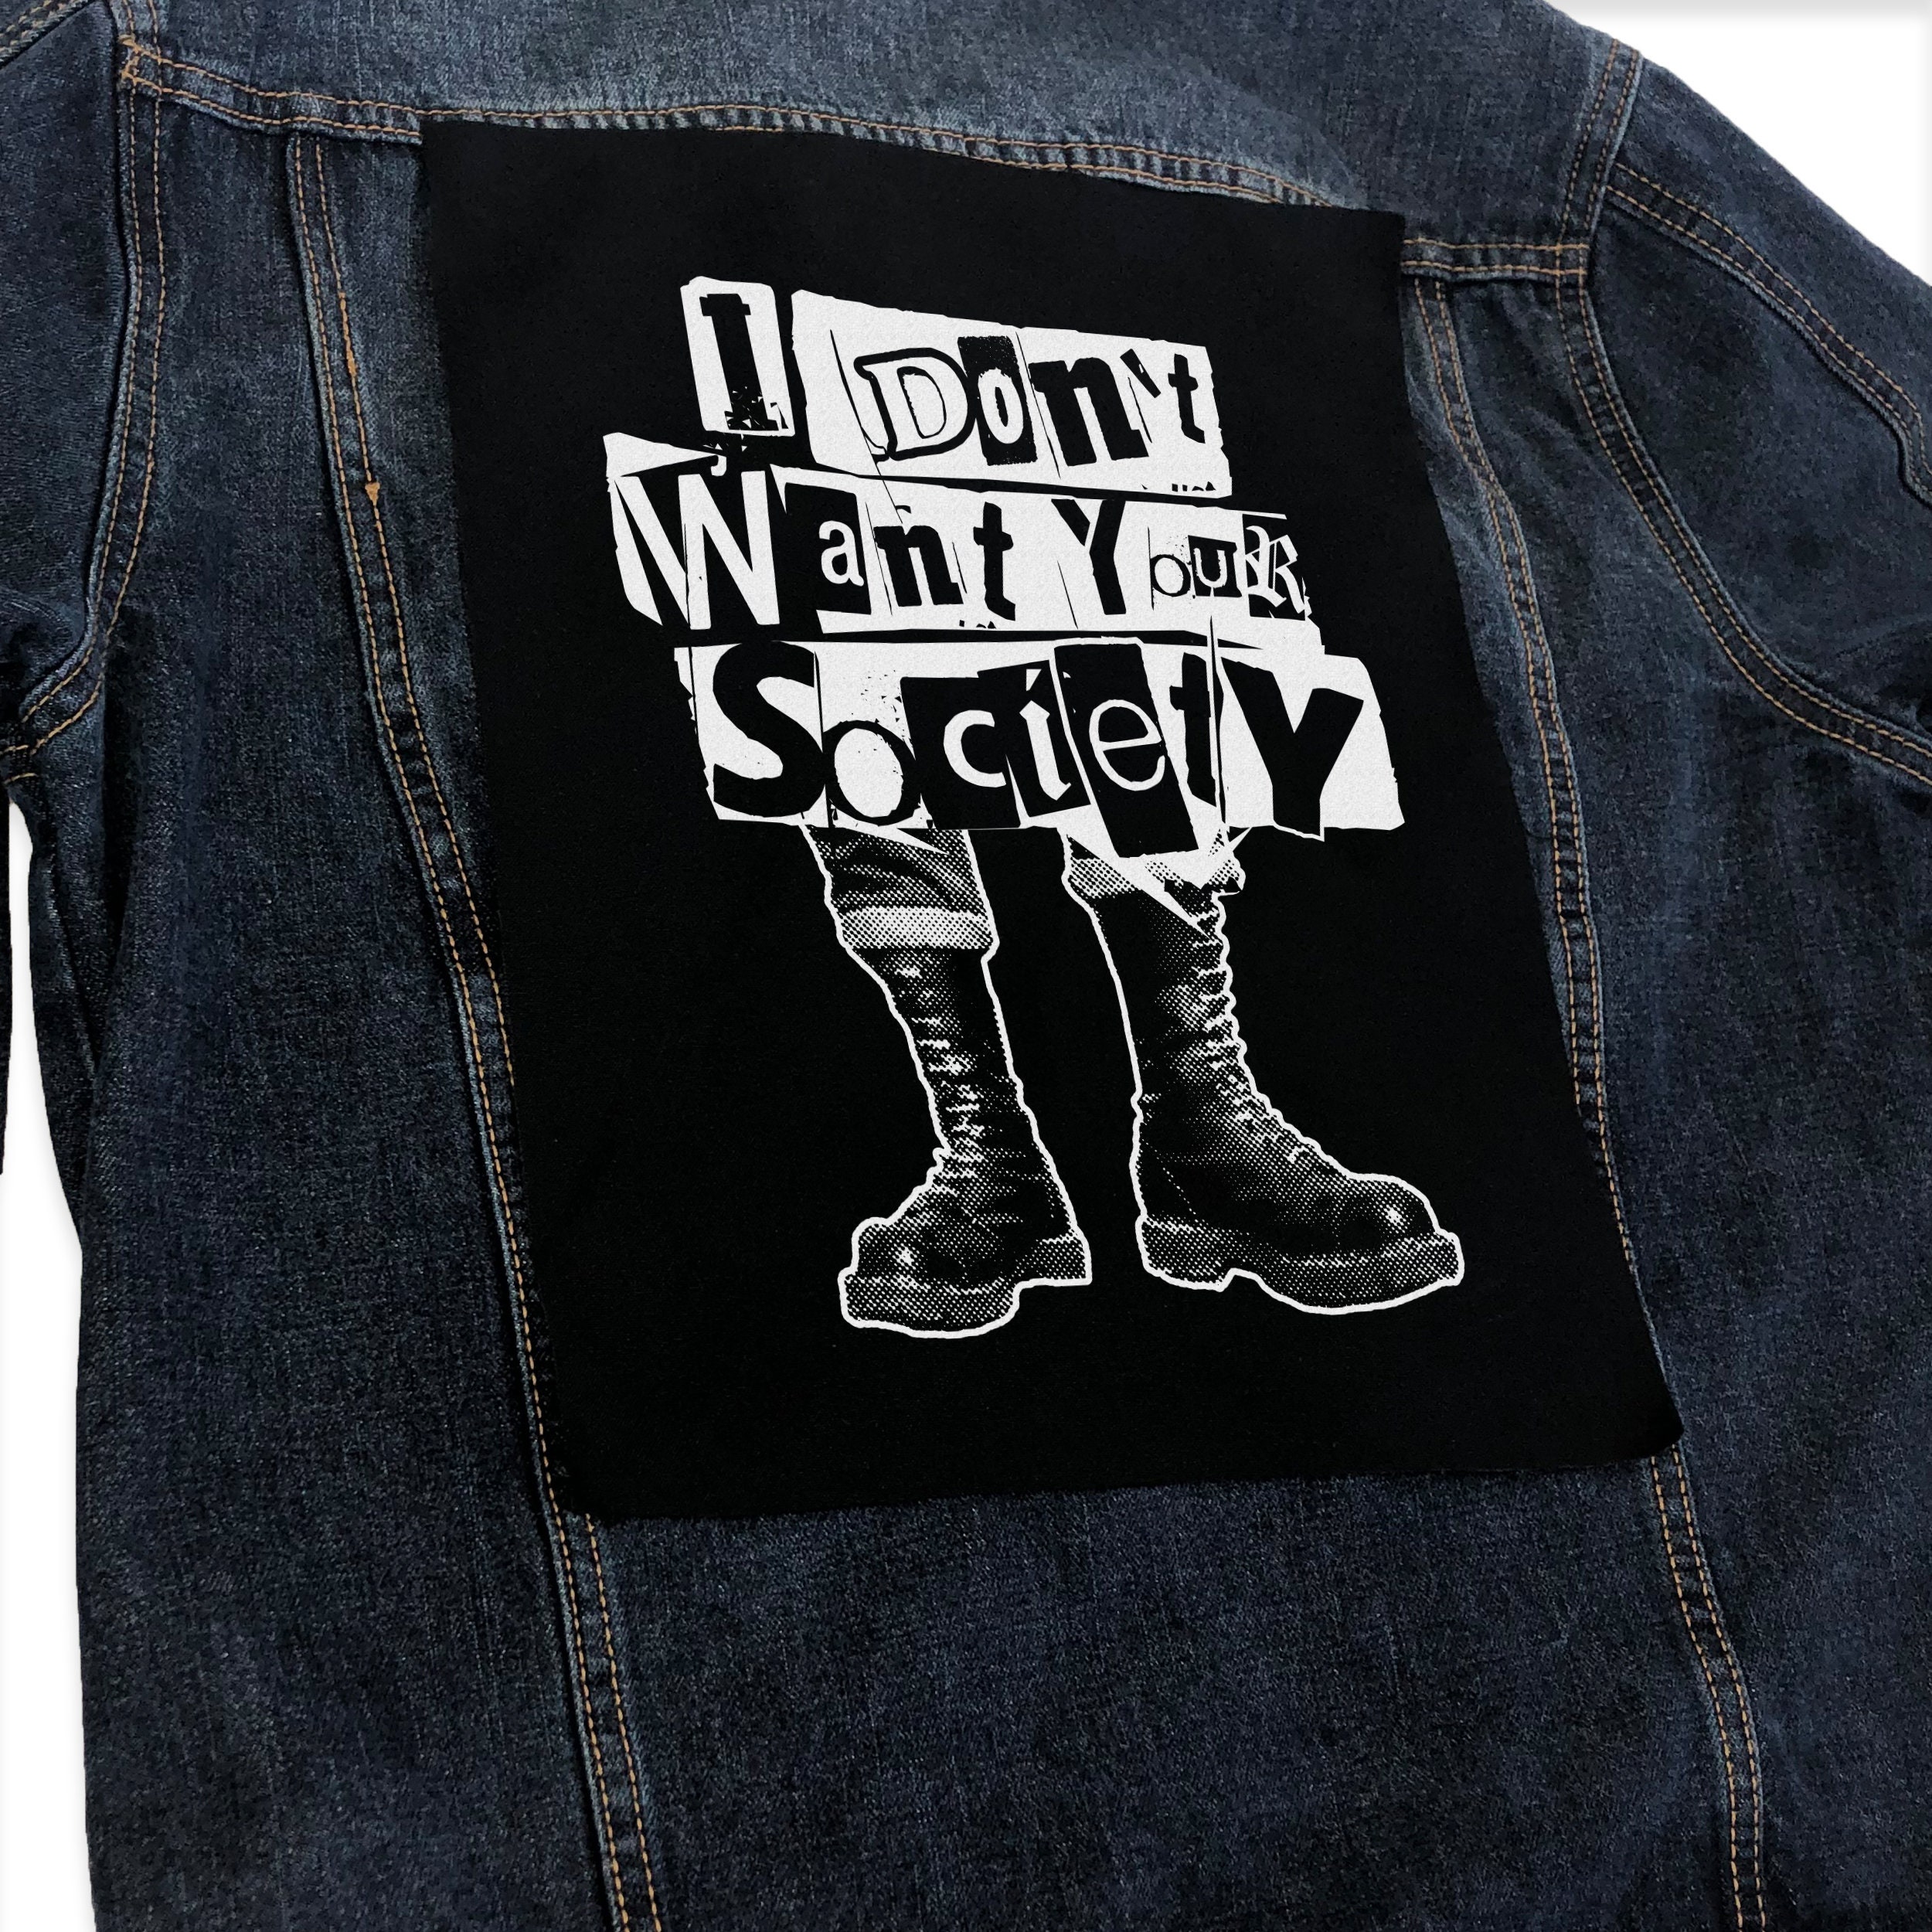 a punk jacket covered in band patches and anarchists